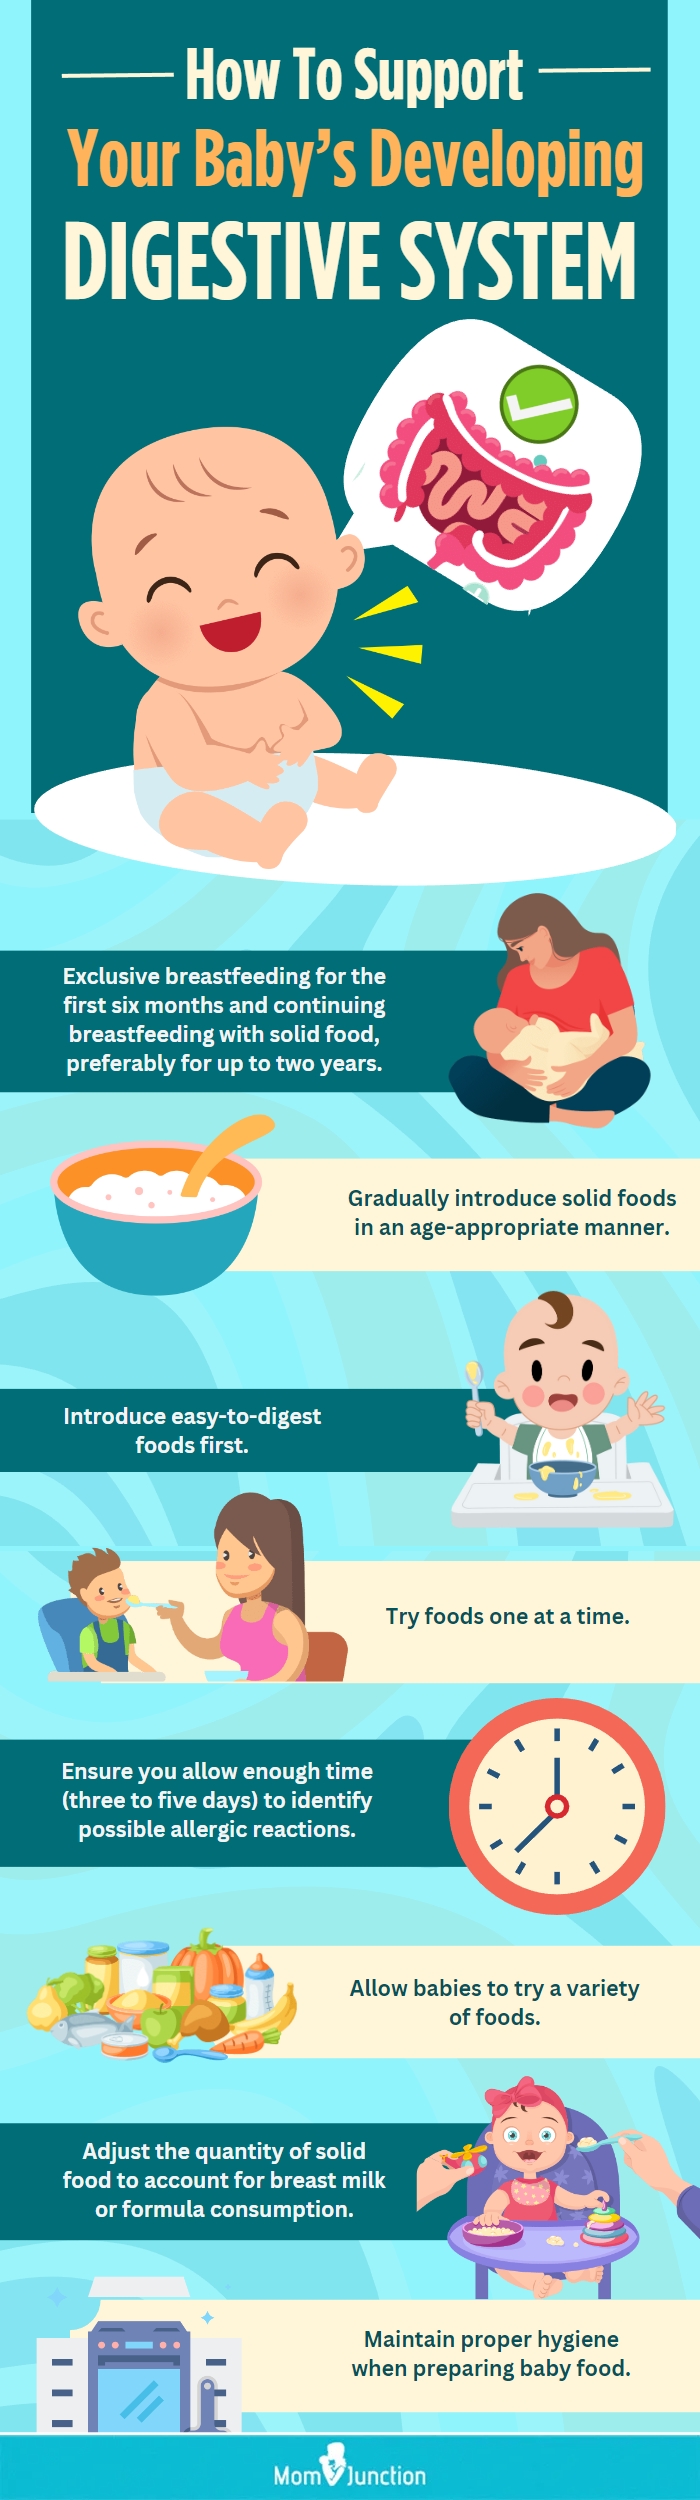 how to support your babys developing digestive system(infographic)